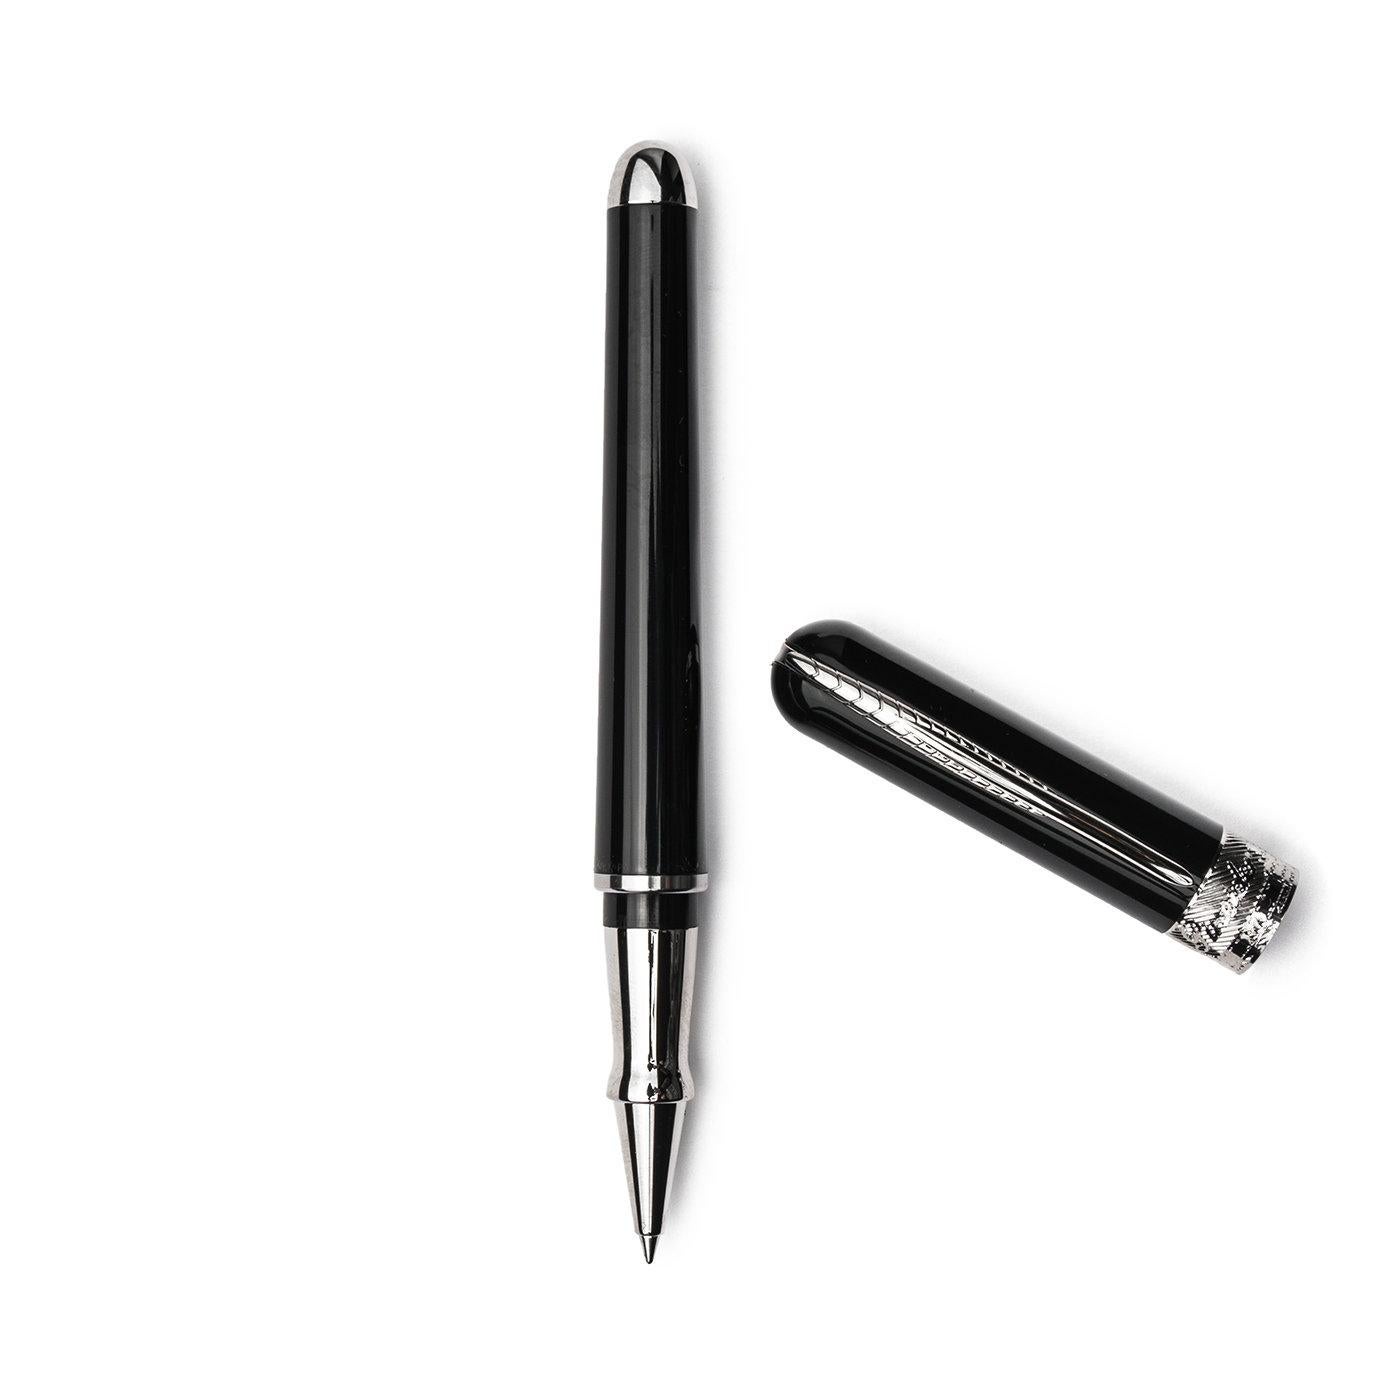 This ultra-elegant fountain pen is distinguished by a black body in UltraResin, a special material developed by Pineider mixing nacre and resin for enhanced weather-resistance and durability. The pen's parts are assembled through an interlocking